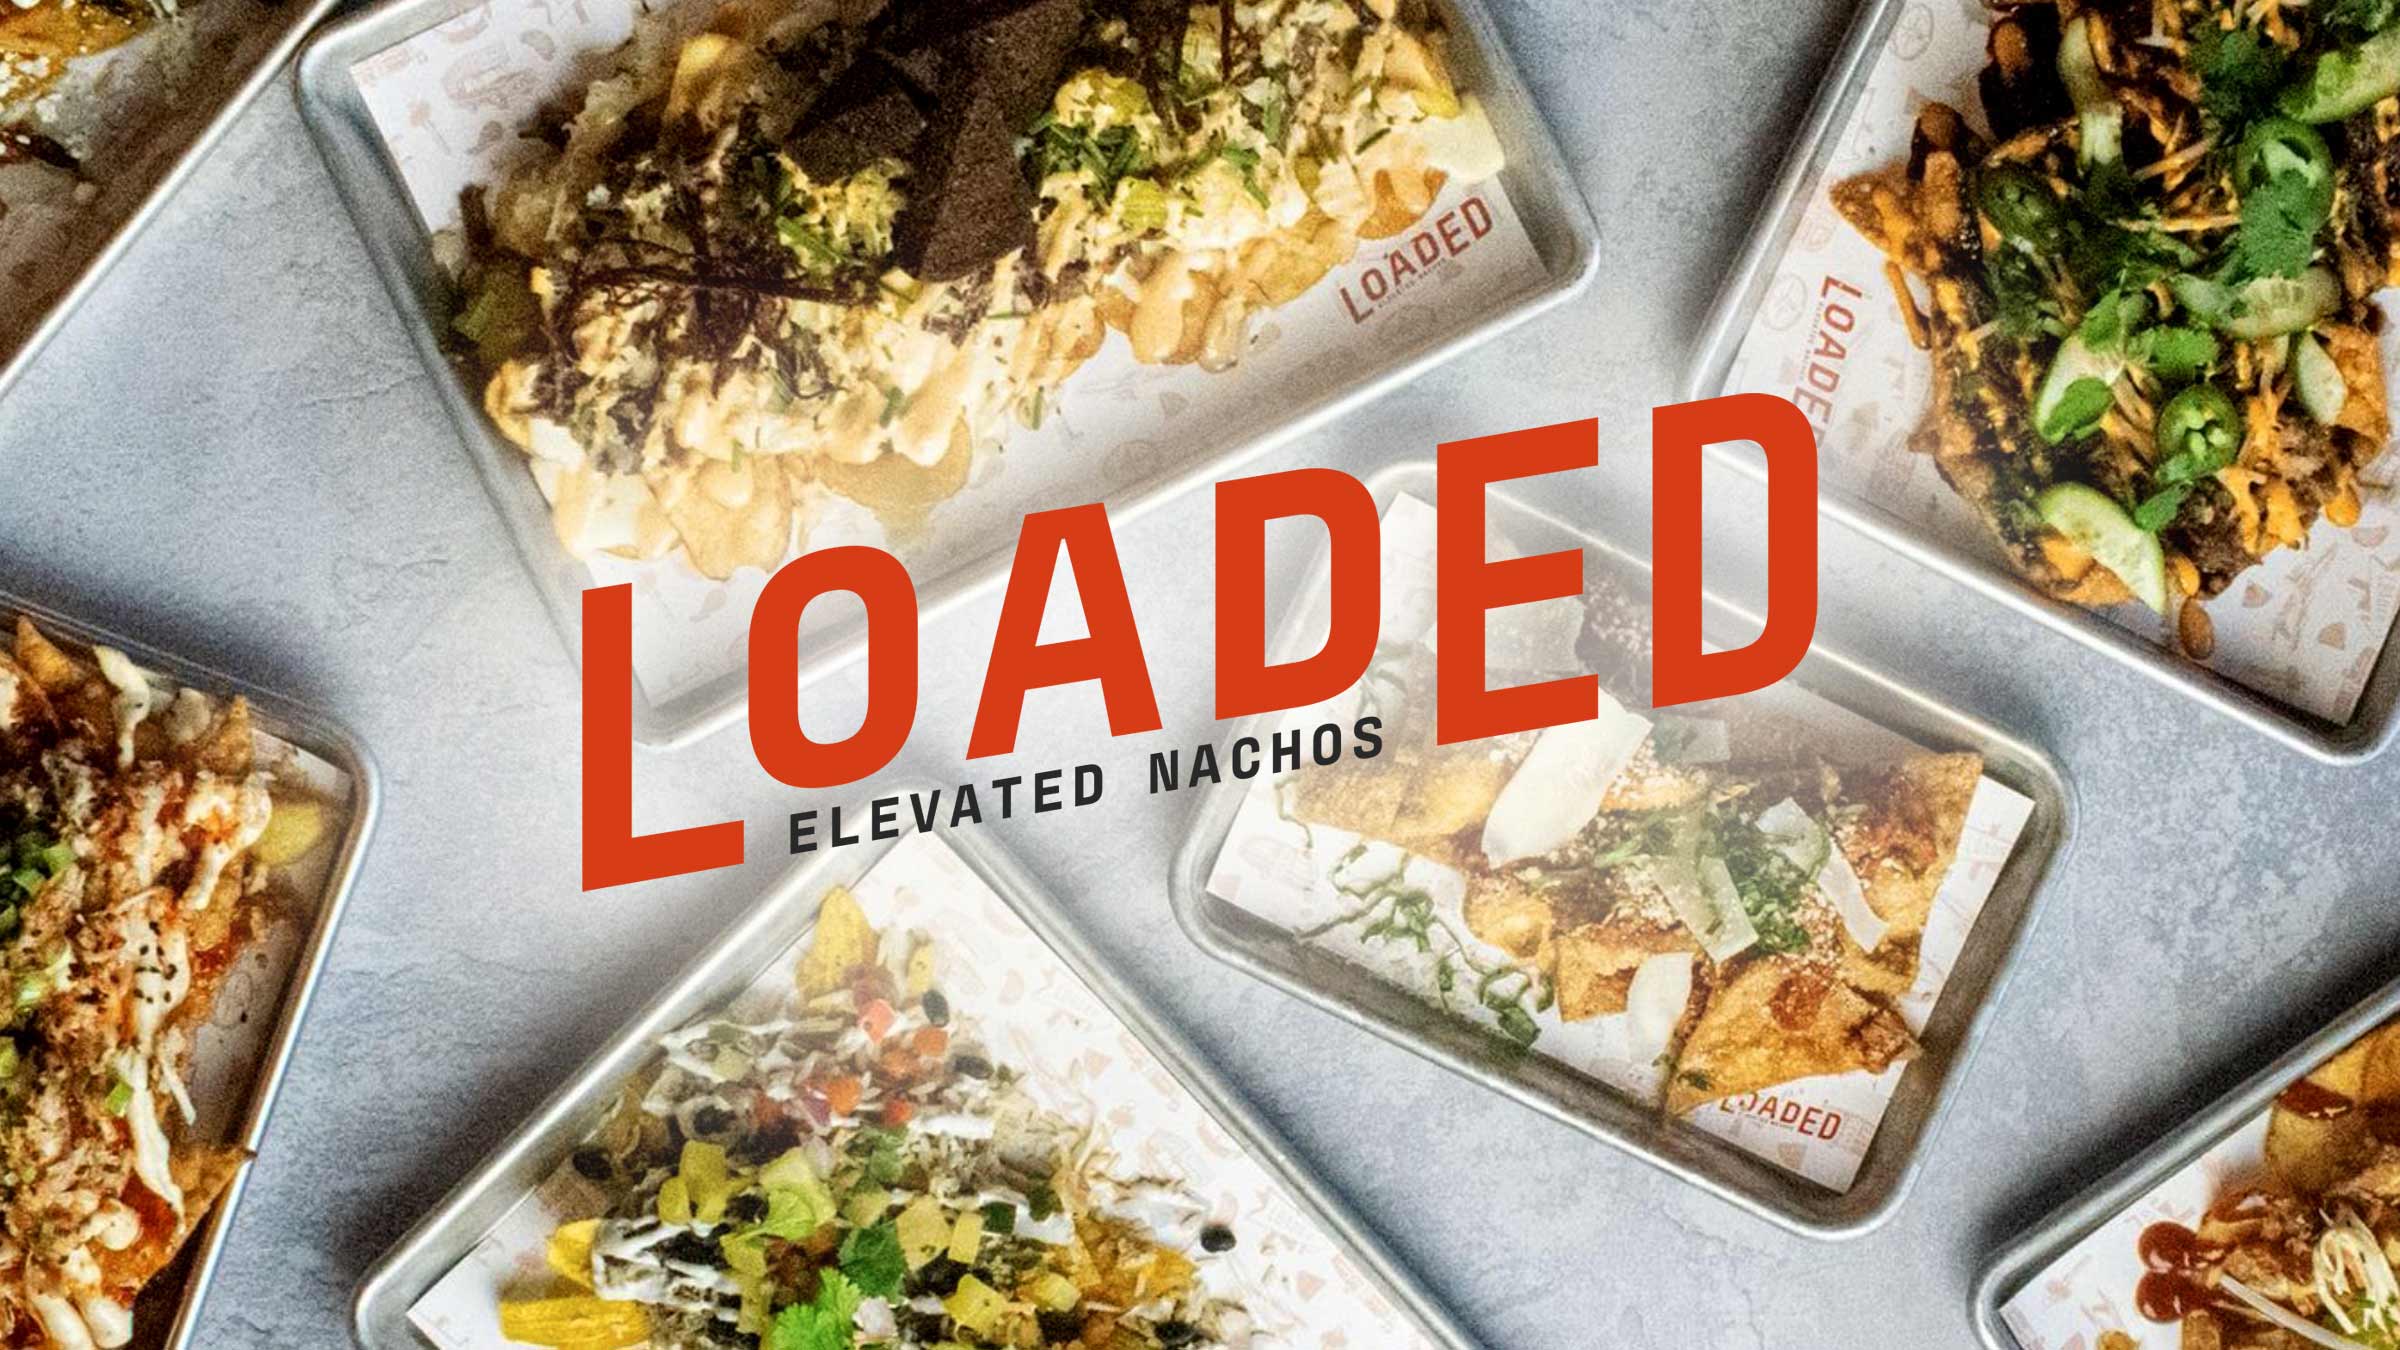 Loaded Elevated Nachos fast casual branding